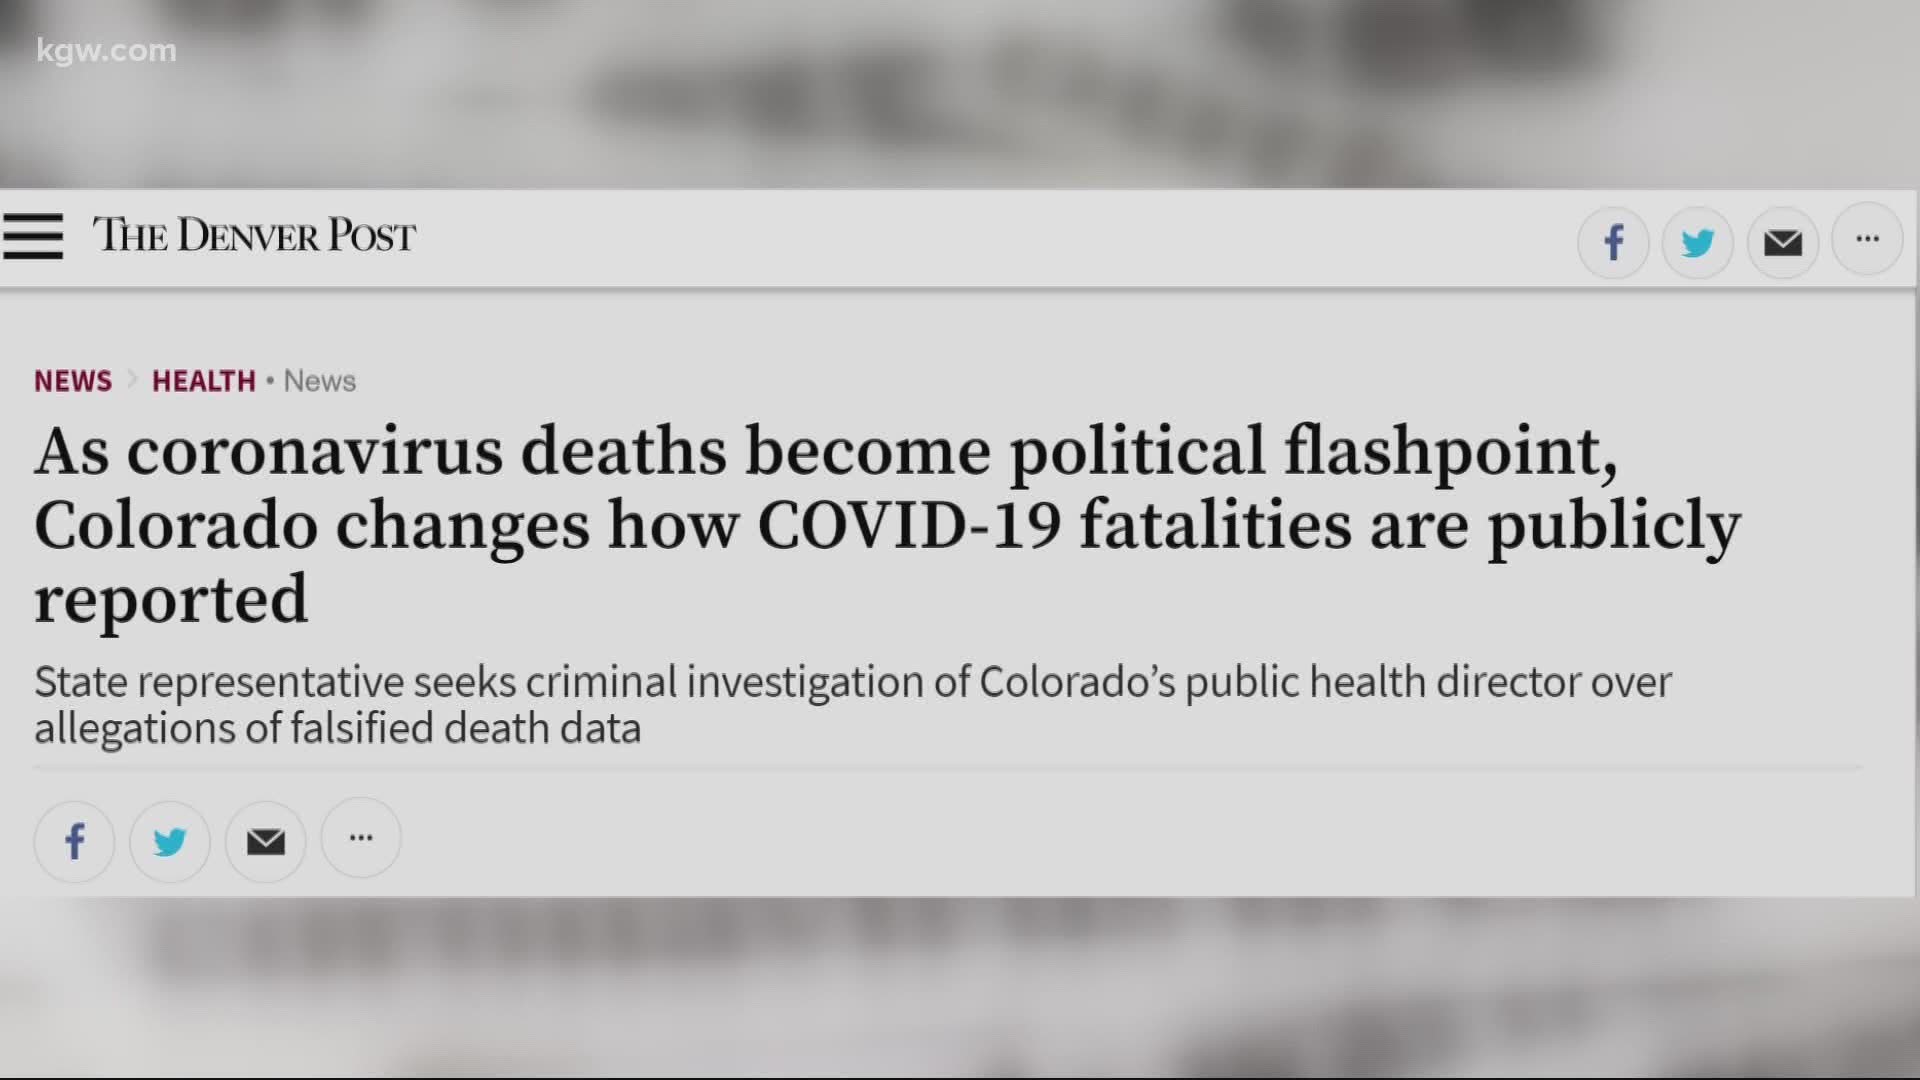 Our neighbors to the north have changed the way they count coronavirus deaths.